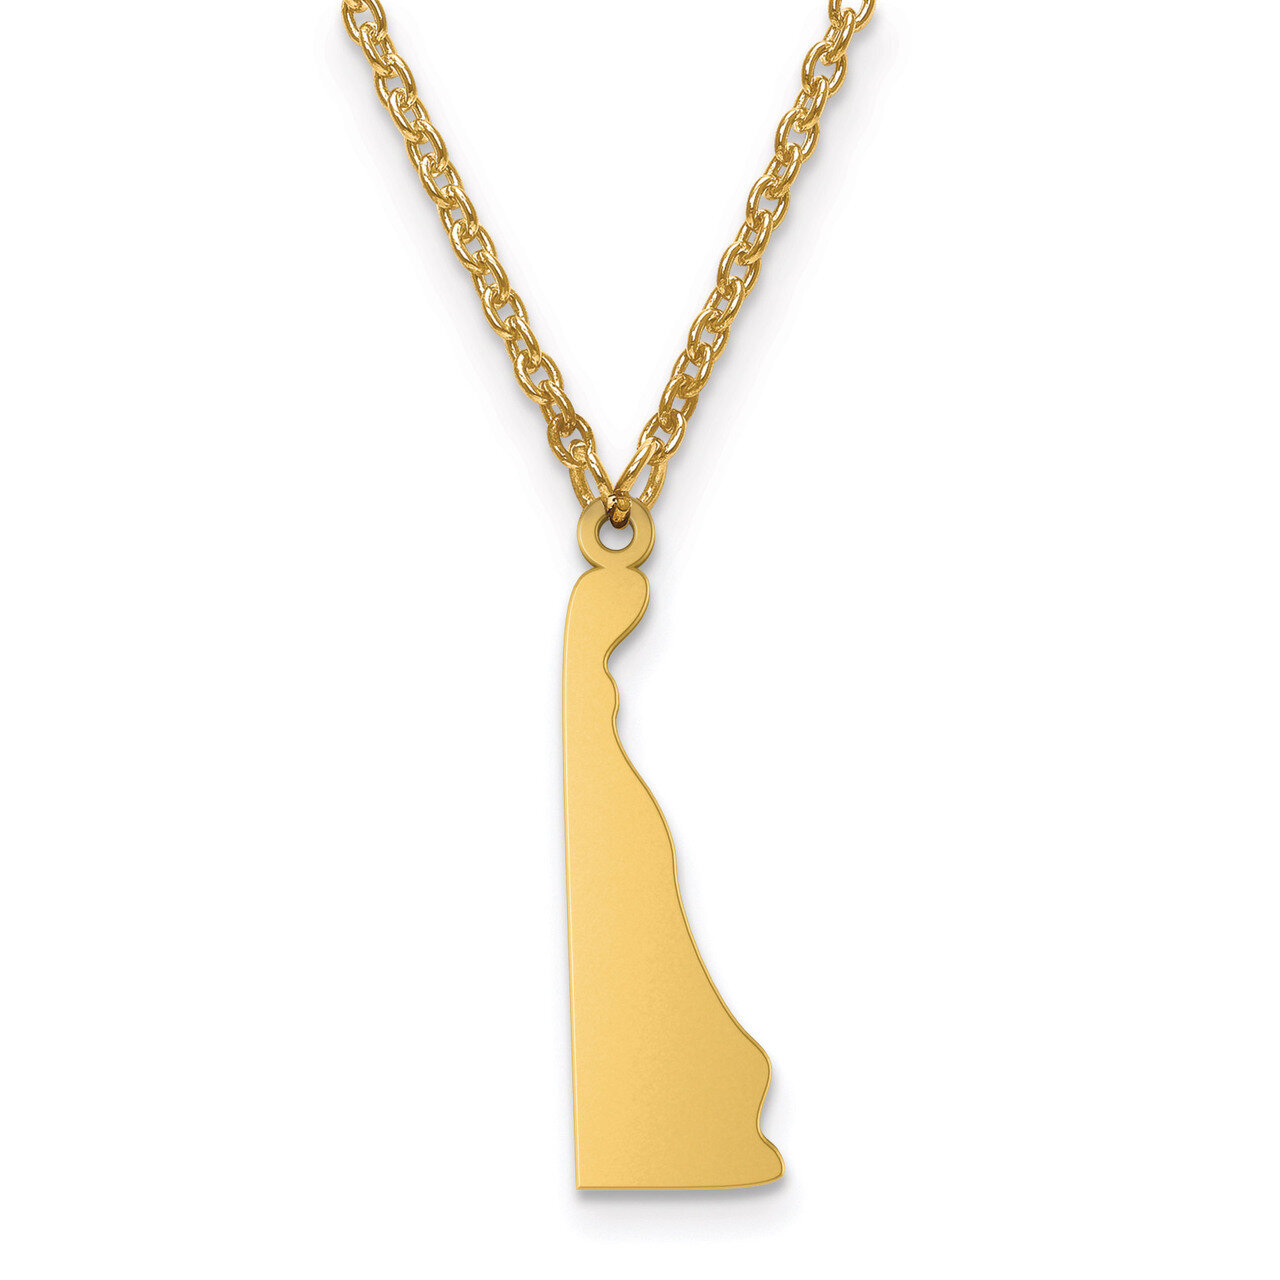 Delaware State Pendant with Chain Engravable Gold-plated on Sterling Silver